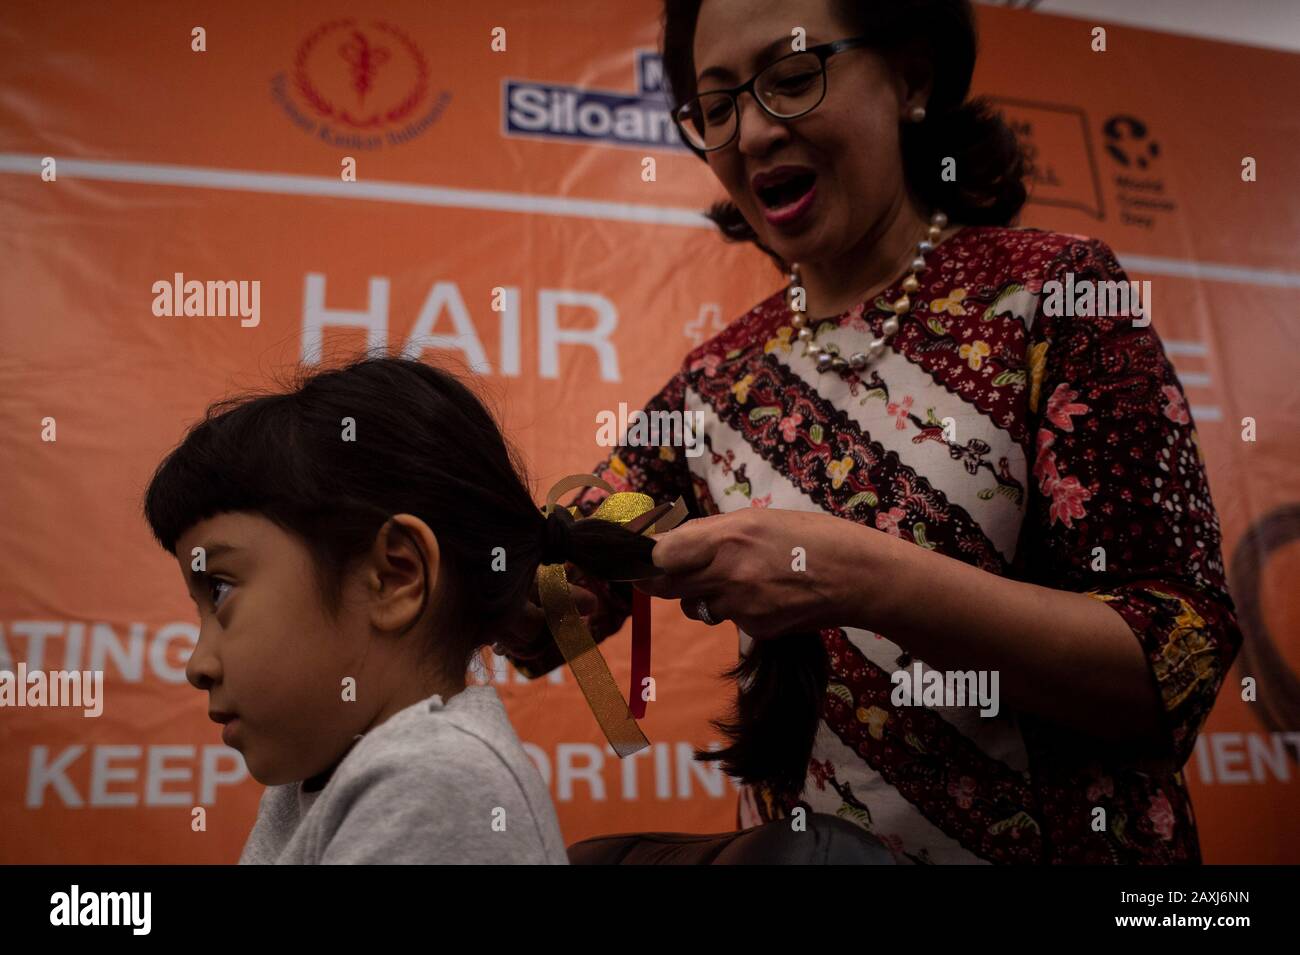 Jakarta, Indonesia. 12th Feb, 2020. A girl participates in a hair donation  event for cancer patients to make wigs at Siloam Hospital Semanggi in  Jakarta, Indonesia, Feb. 12, 2020. Credit: Agung Kuncahya